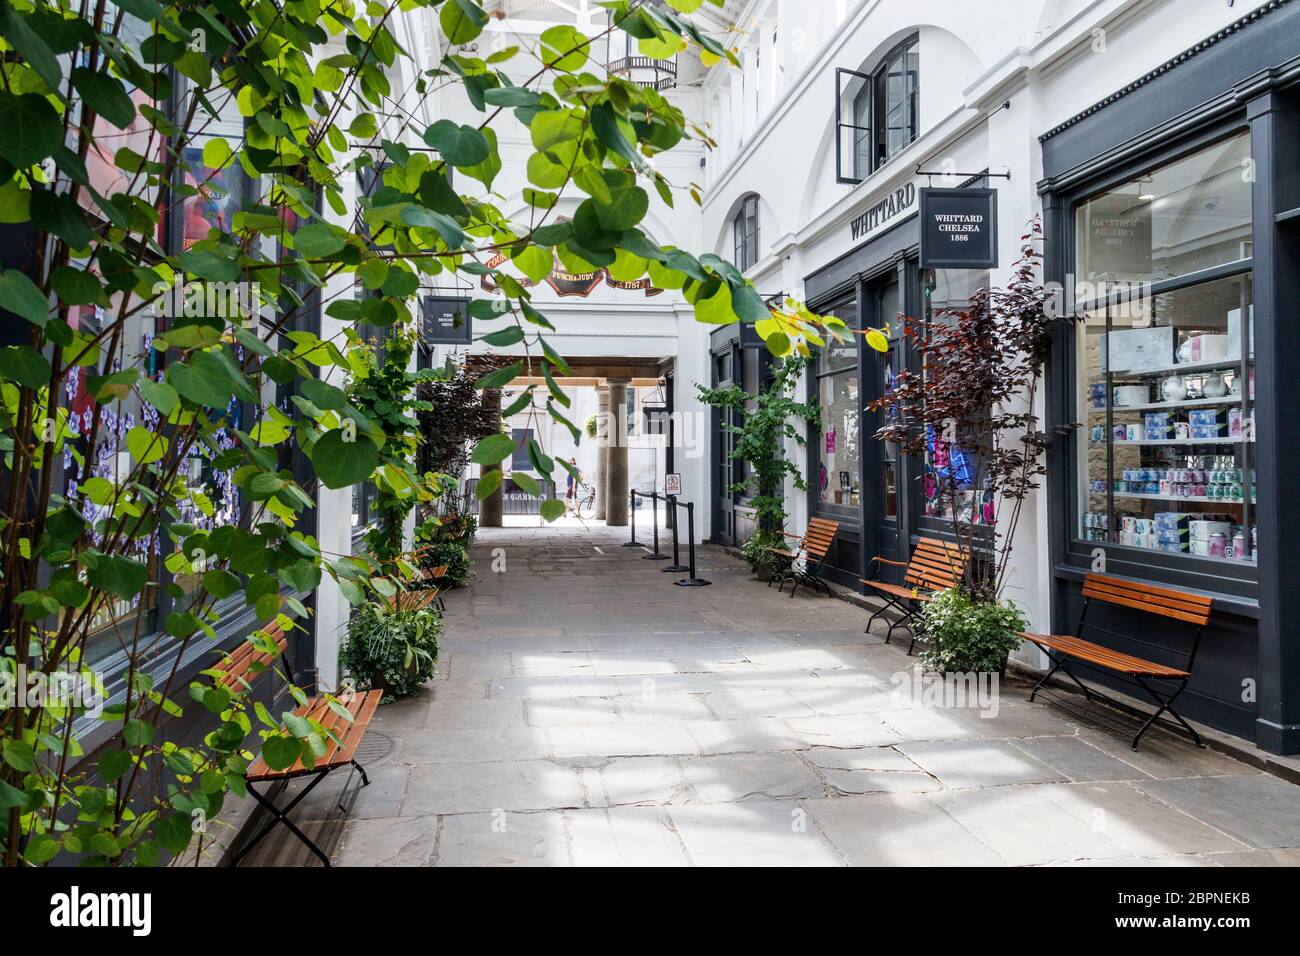 Closed shops in Covent Garden Market, normally busy, almost deserted on a weekend during the coronavirus pandemic lockdown, London, UK Stock Photo